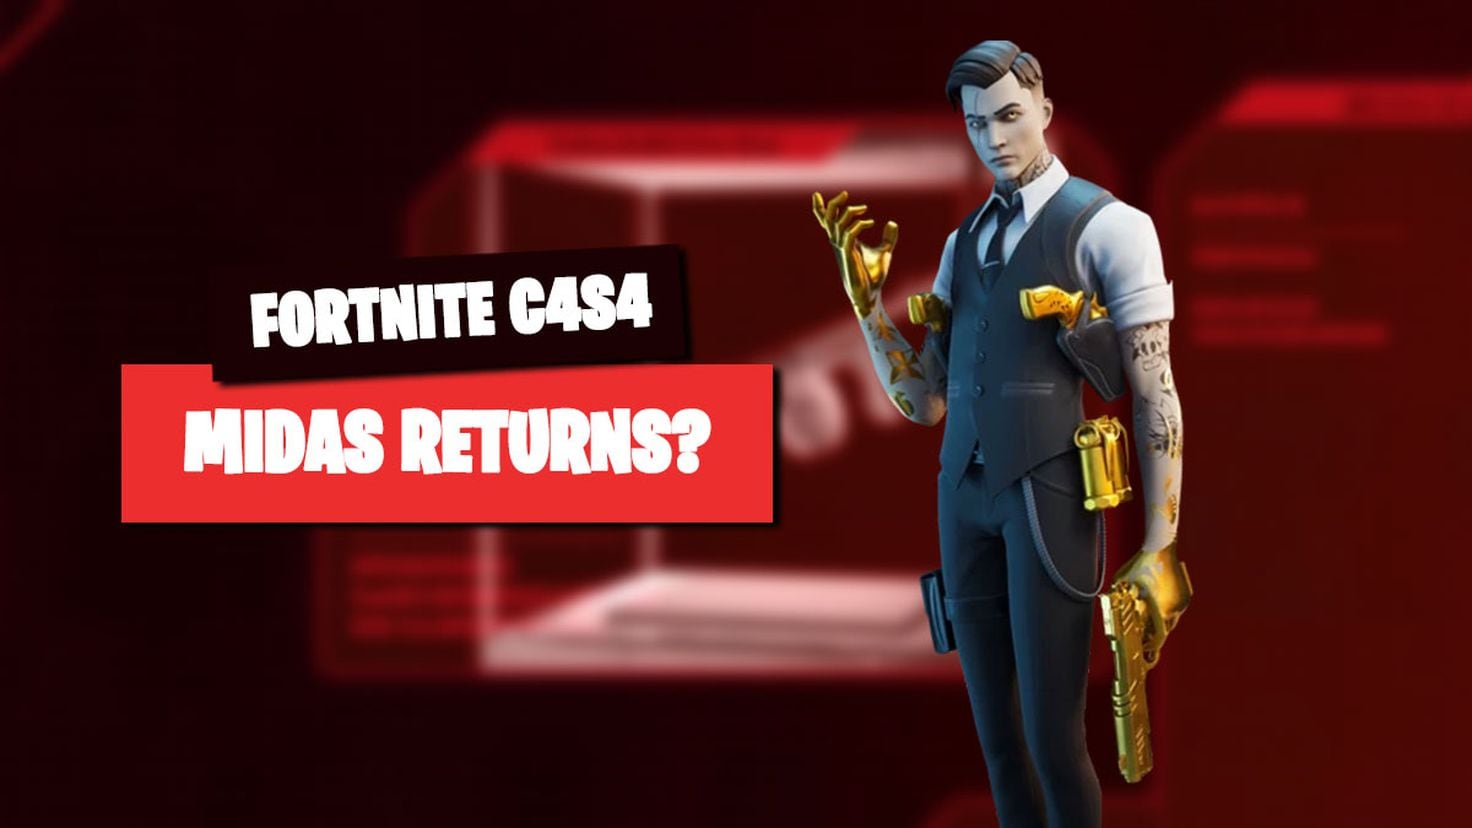 A new Fortnite teaser reveals the return of Midas in the next season ...